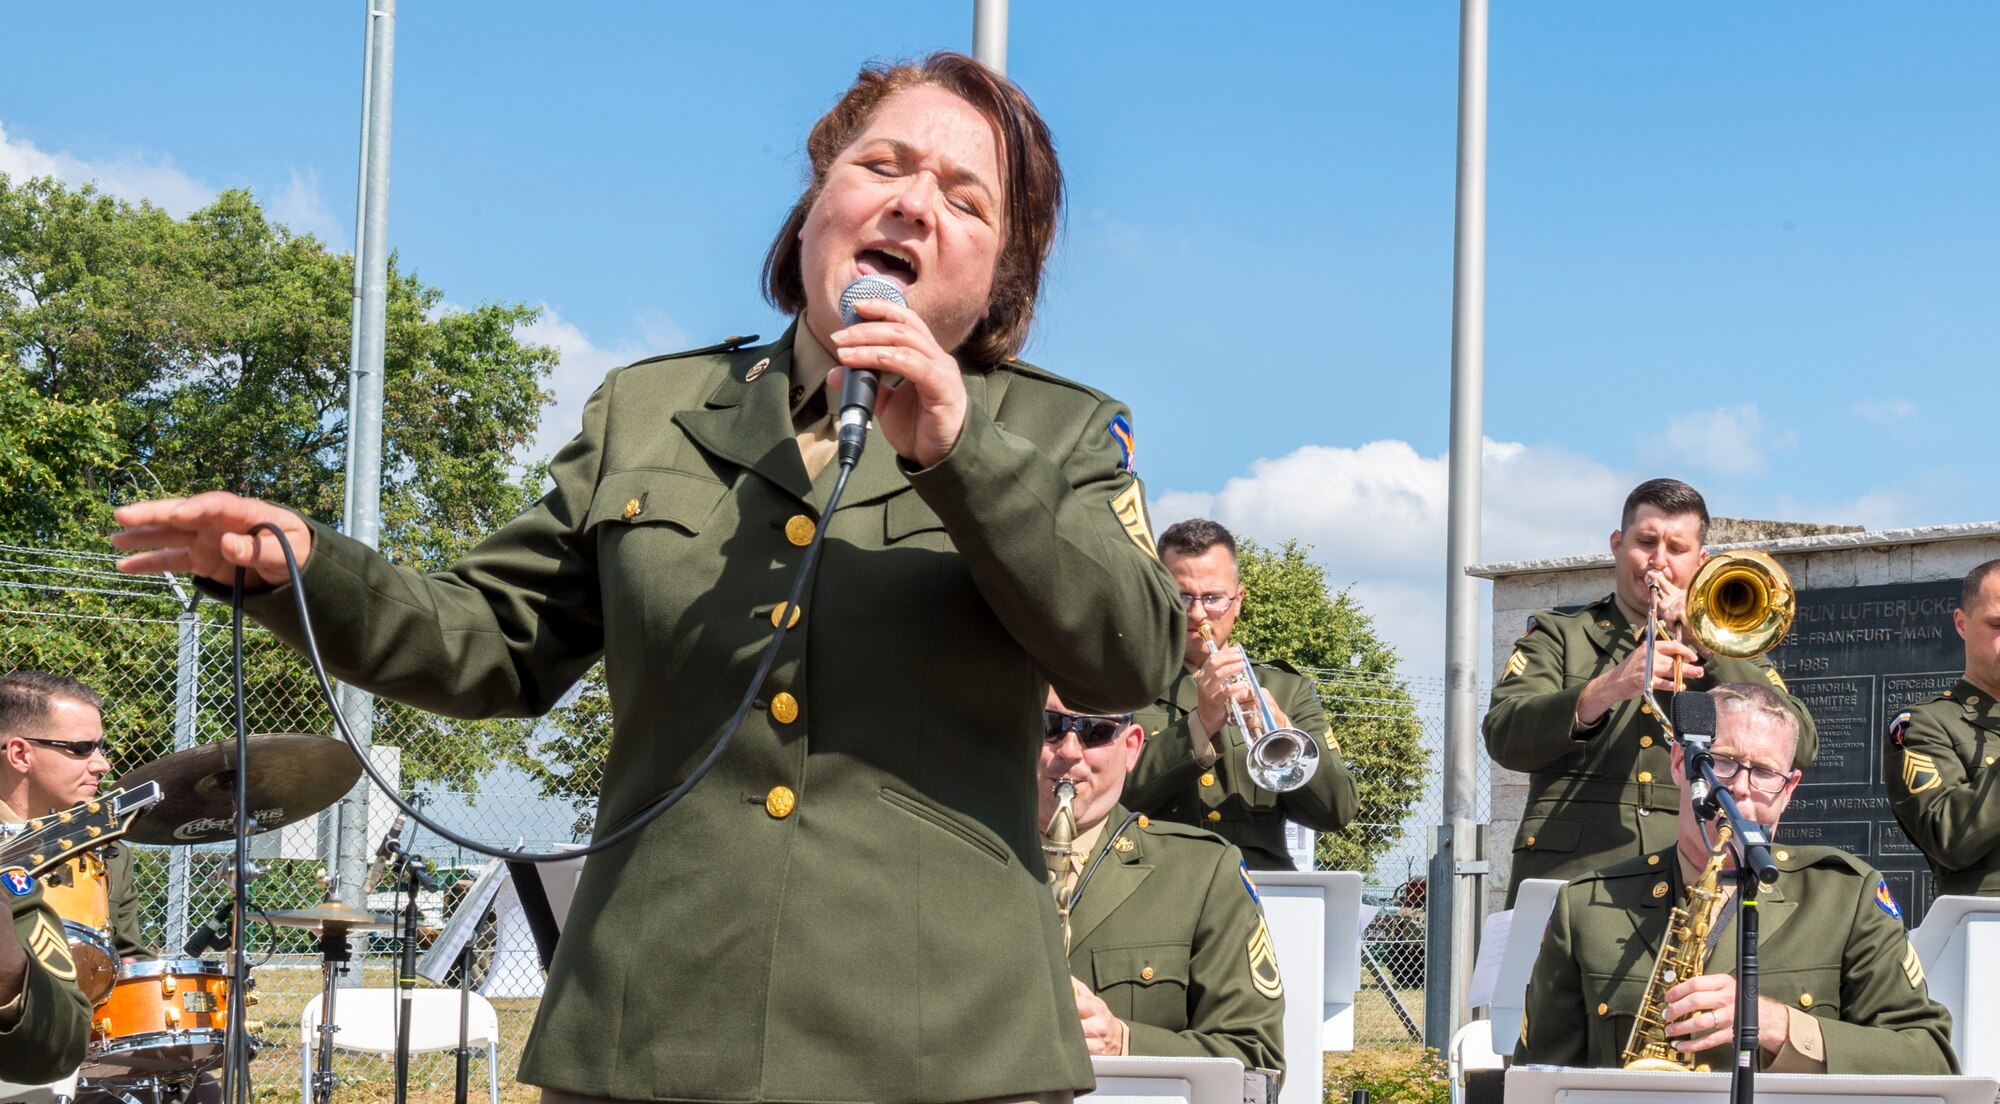 Master Sgt. Michele Harris and members of the United States Air Forces in Europe jazz band performing during the ceremony for the 70th anniversary of the Berlin Airlift, June 26, 2018, in Frankfurt, Germany. The Berlin Airlift memorial ceremony honored the 70th Anniversary of the beginning of the Berlin Airlift. The event also honored the 101 lives lost from the participating countries. (U.S. Air Force photo by Senior Airman Nick Emerick)